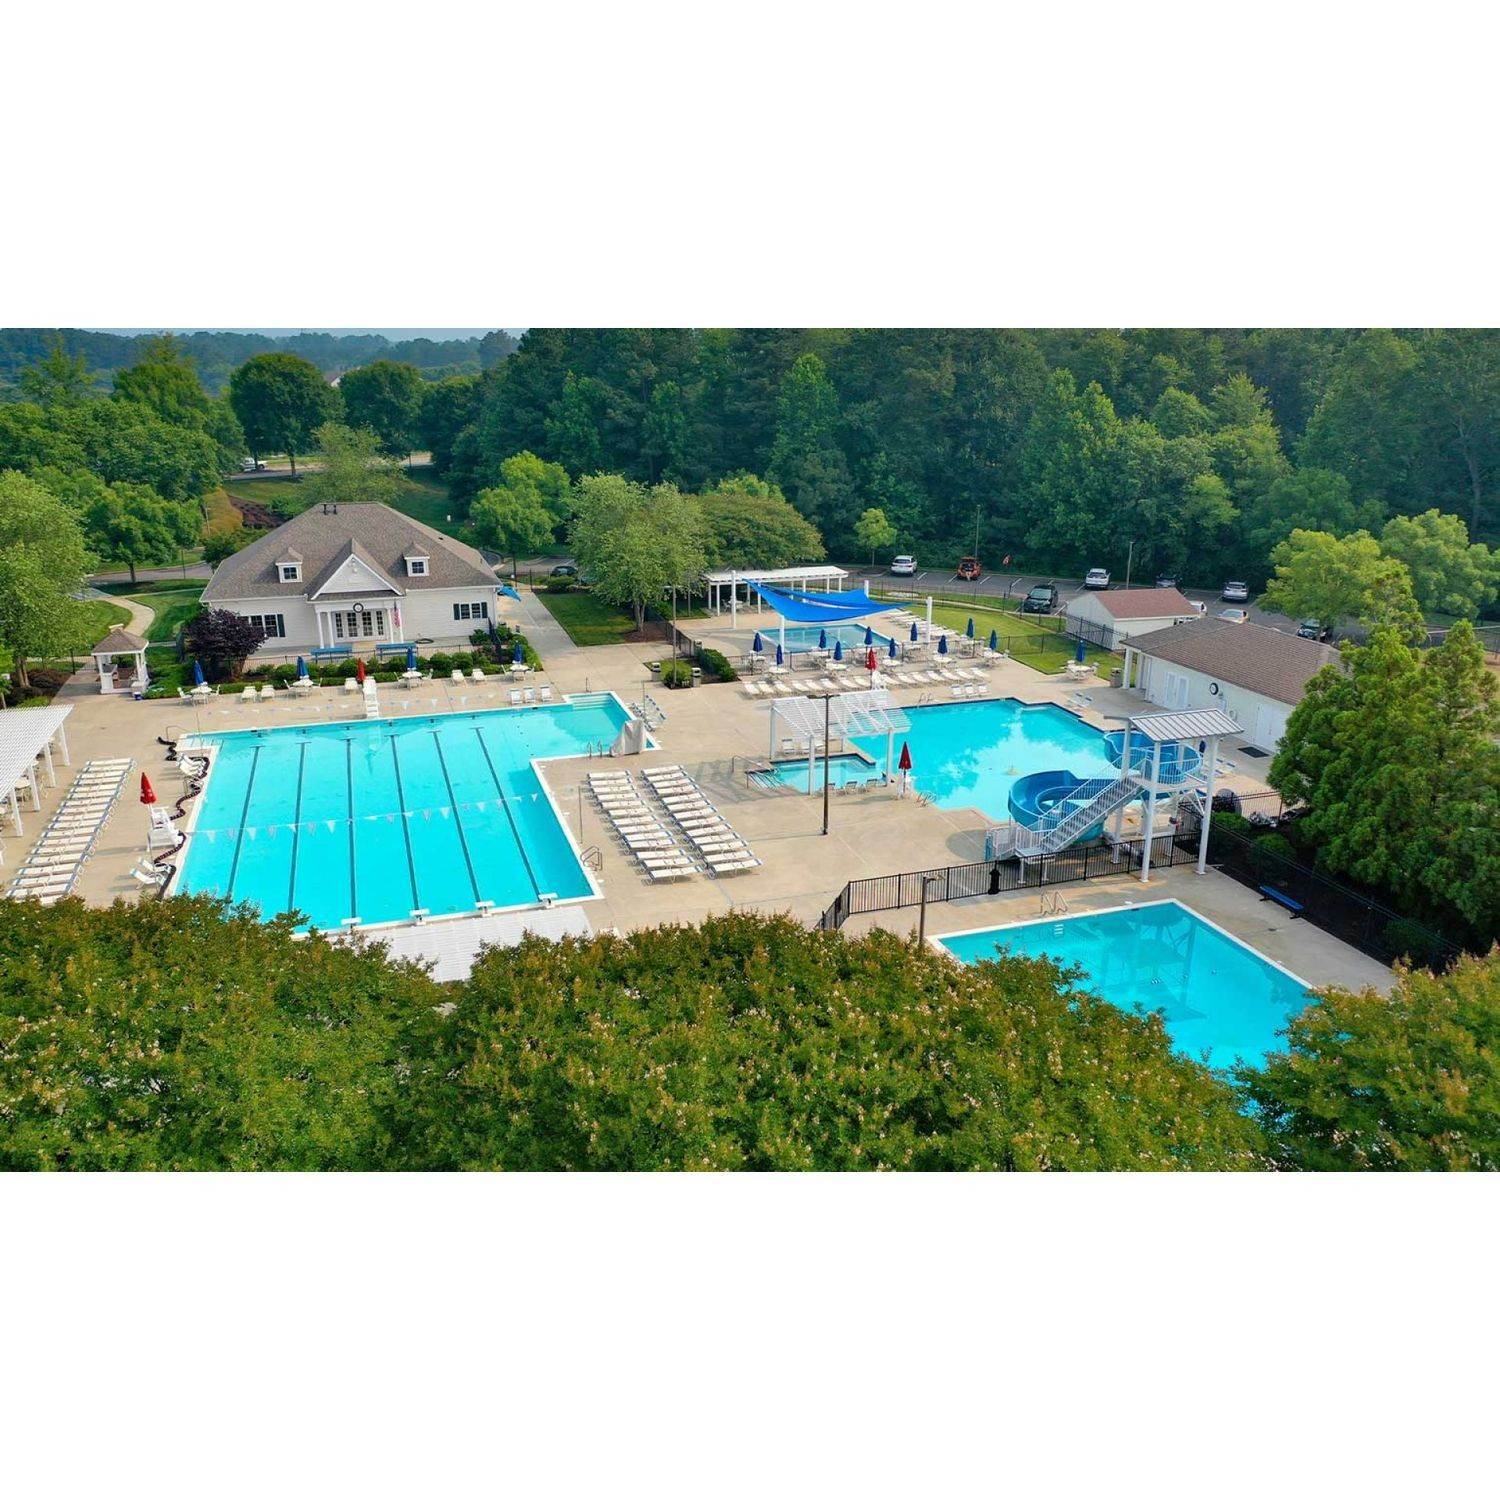 3. The Pointe at Twin Hickory建于 4605 Pouncey Tract Road, Glen Allen, VA 23059